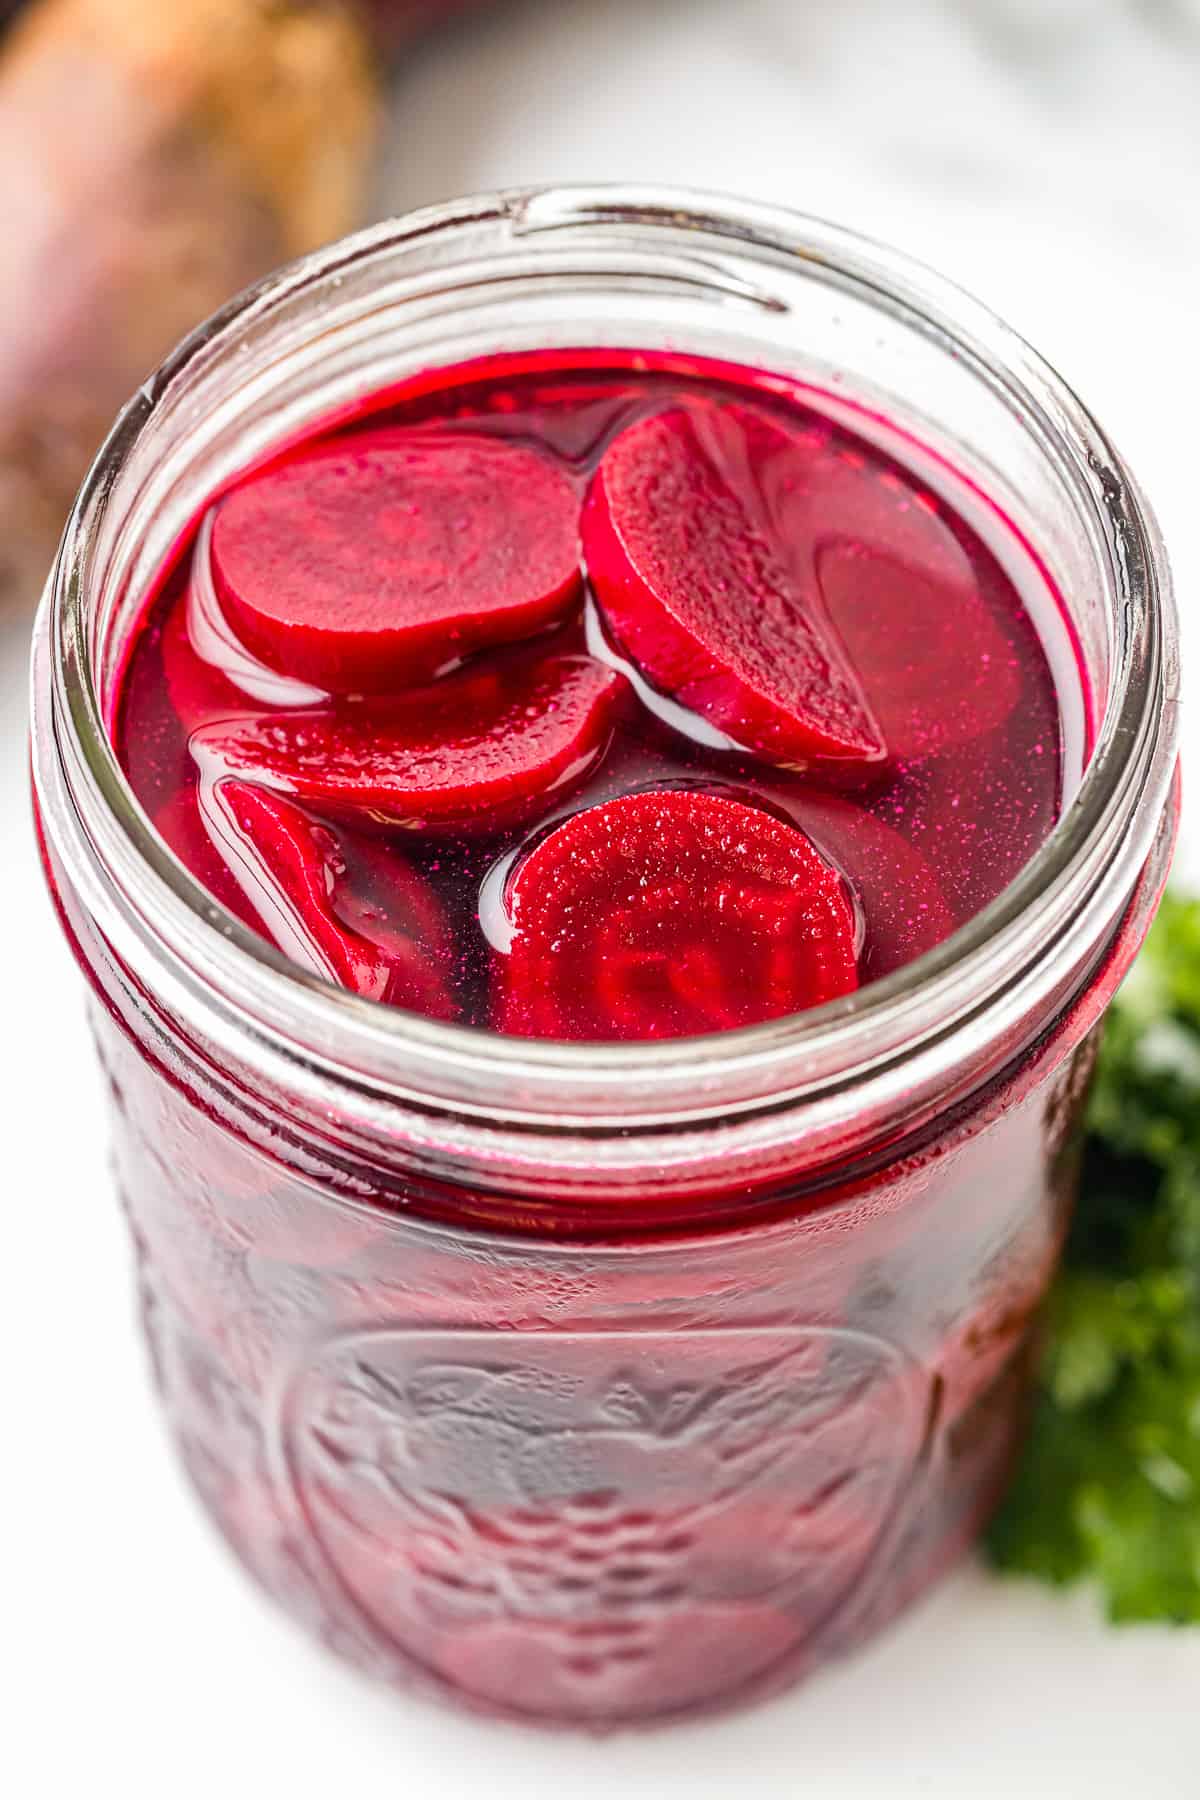 pickled beets in a wide mouth glass jar.